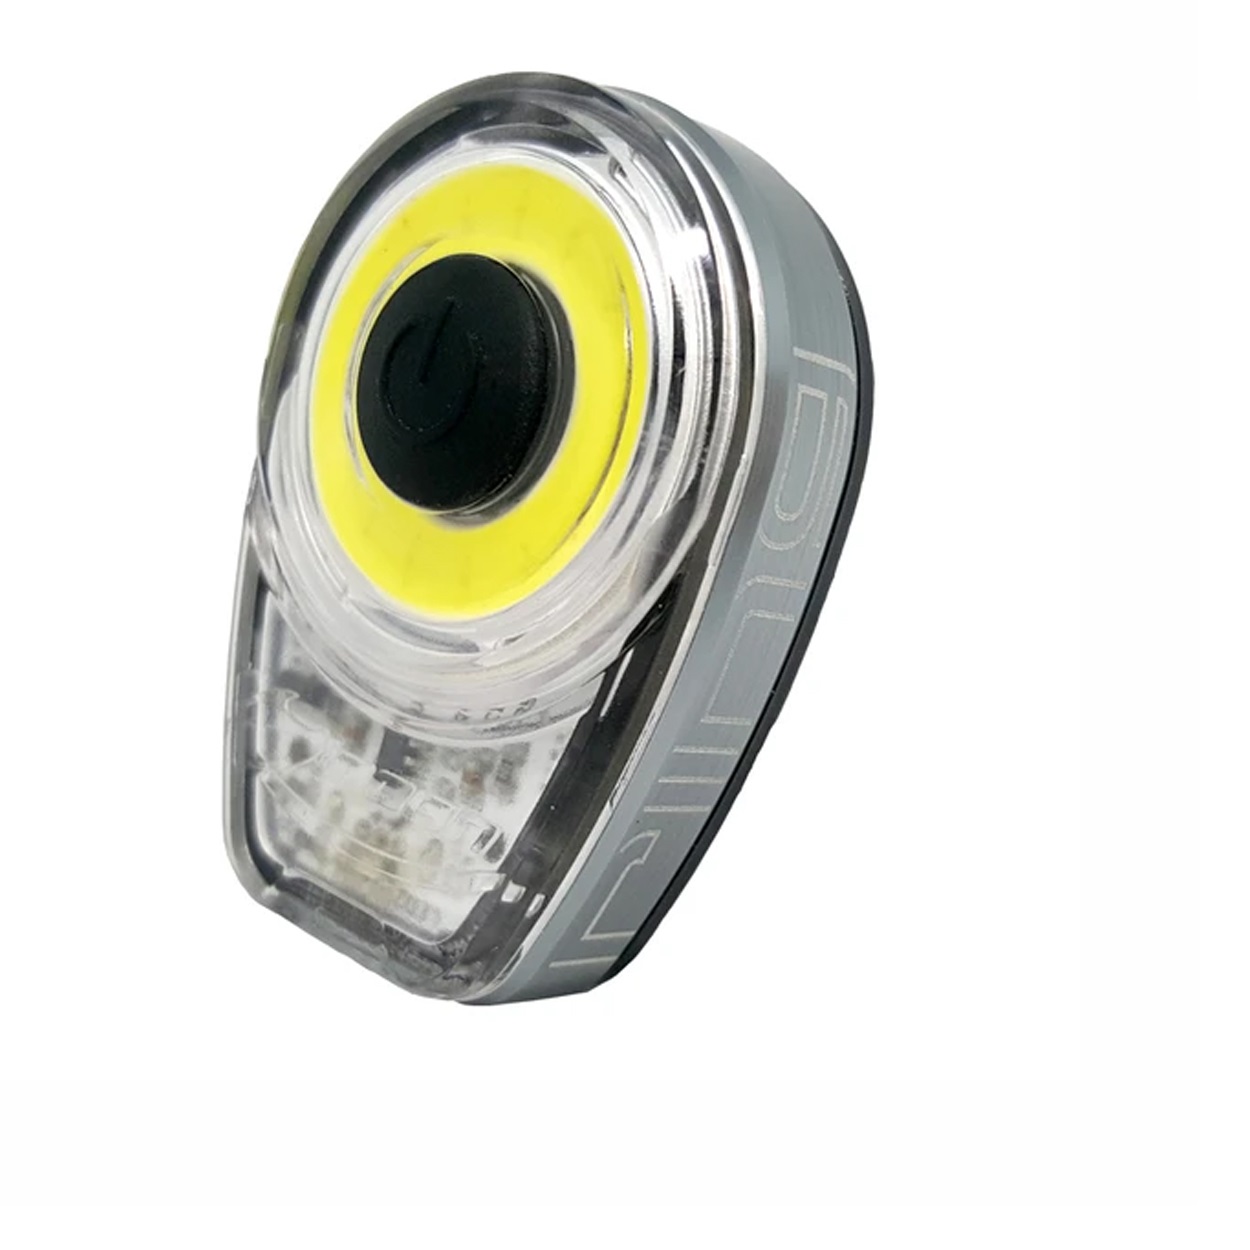 Moon RING 60 Lumens USB Rechargeable White Bicycle Bike Light